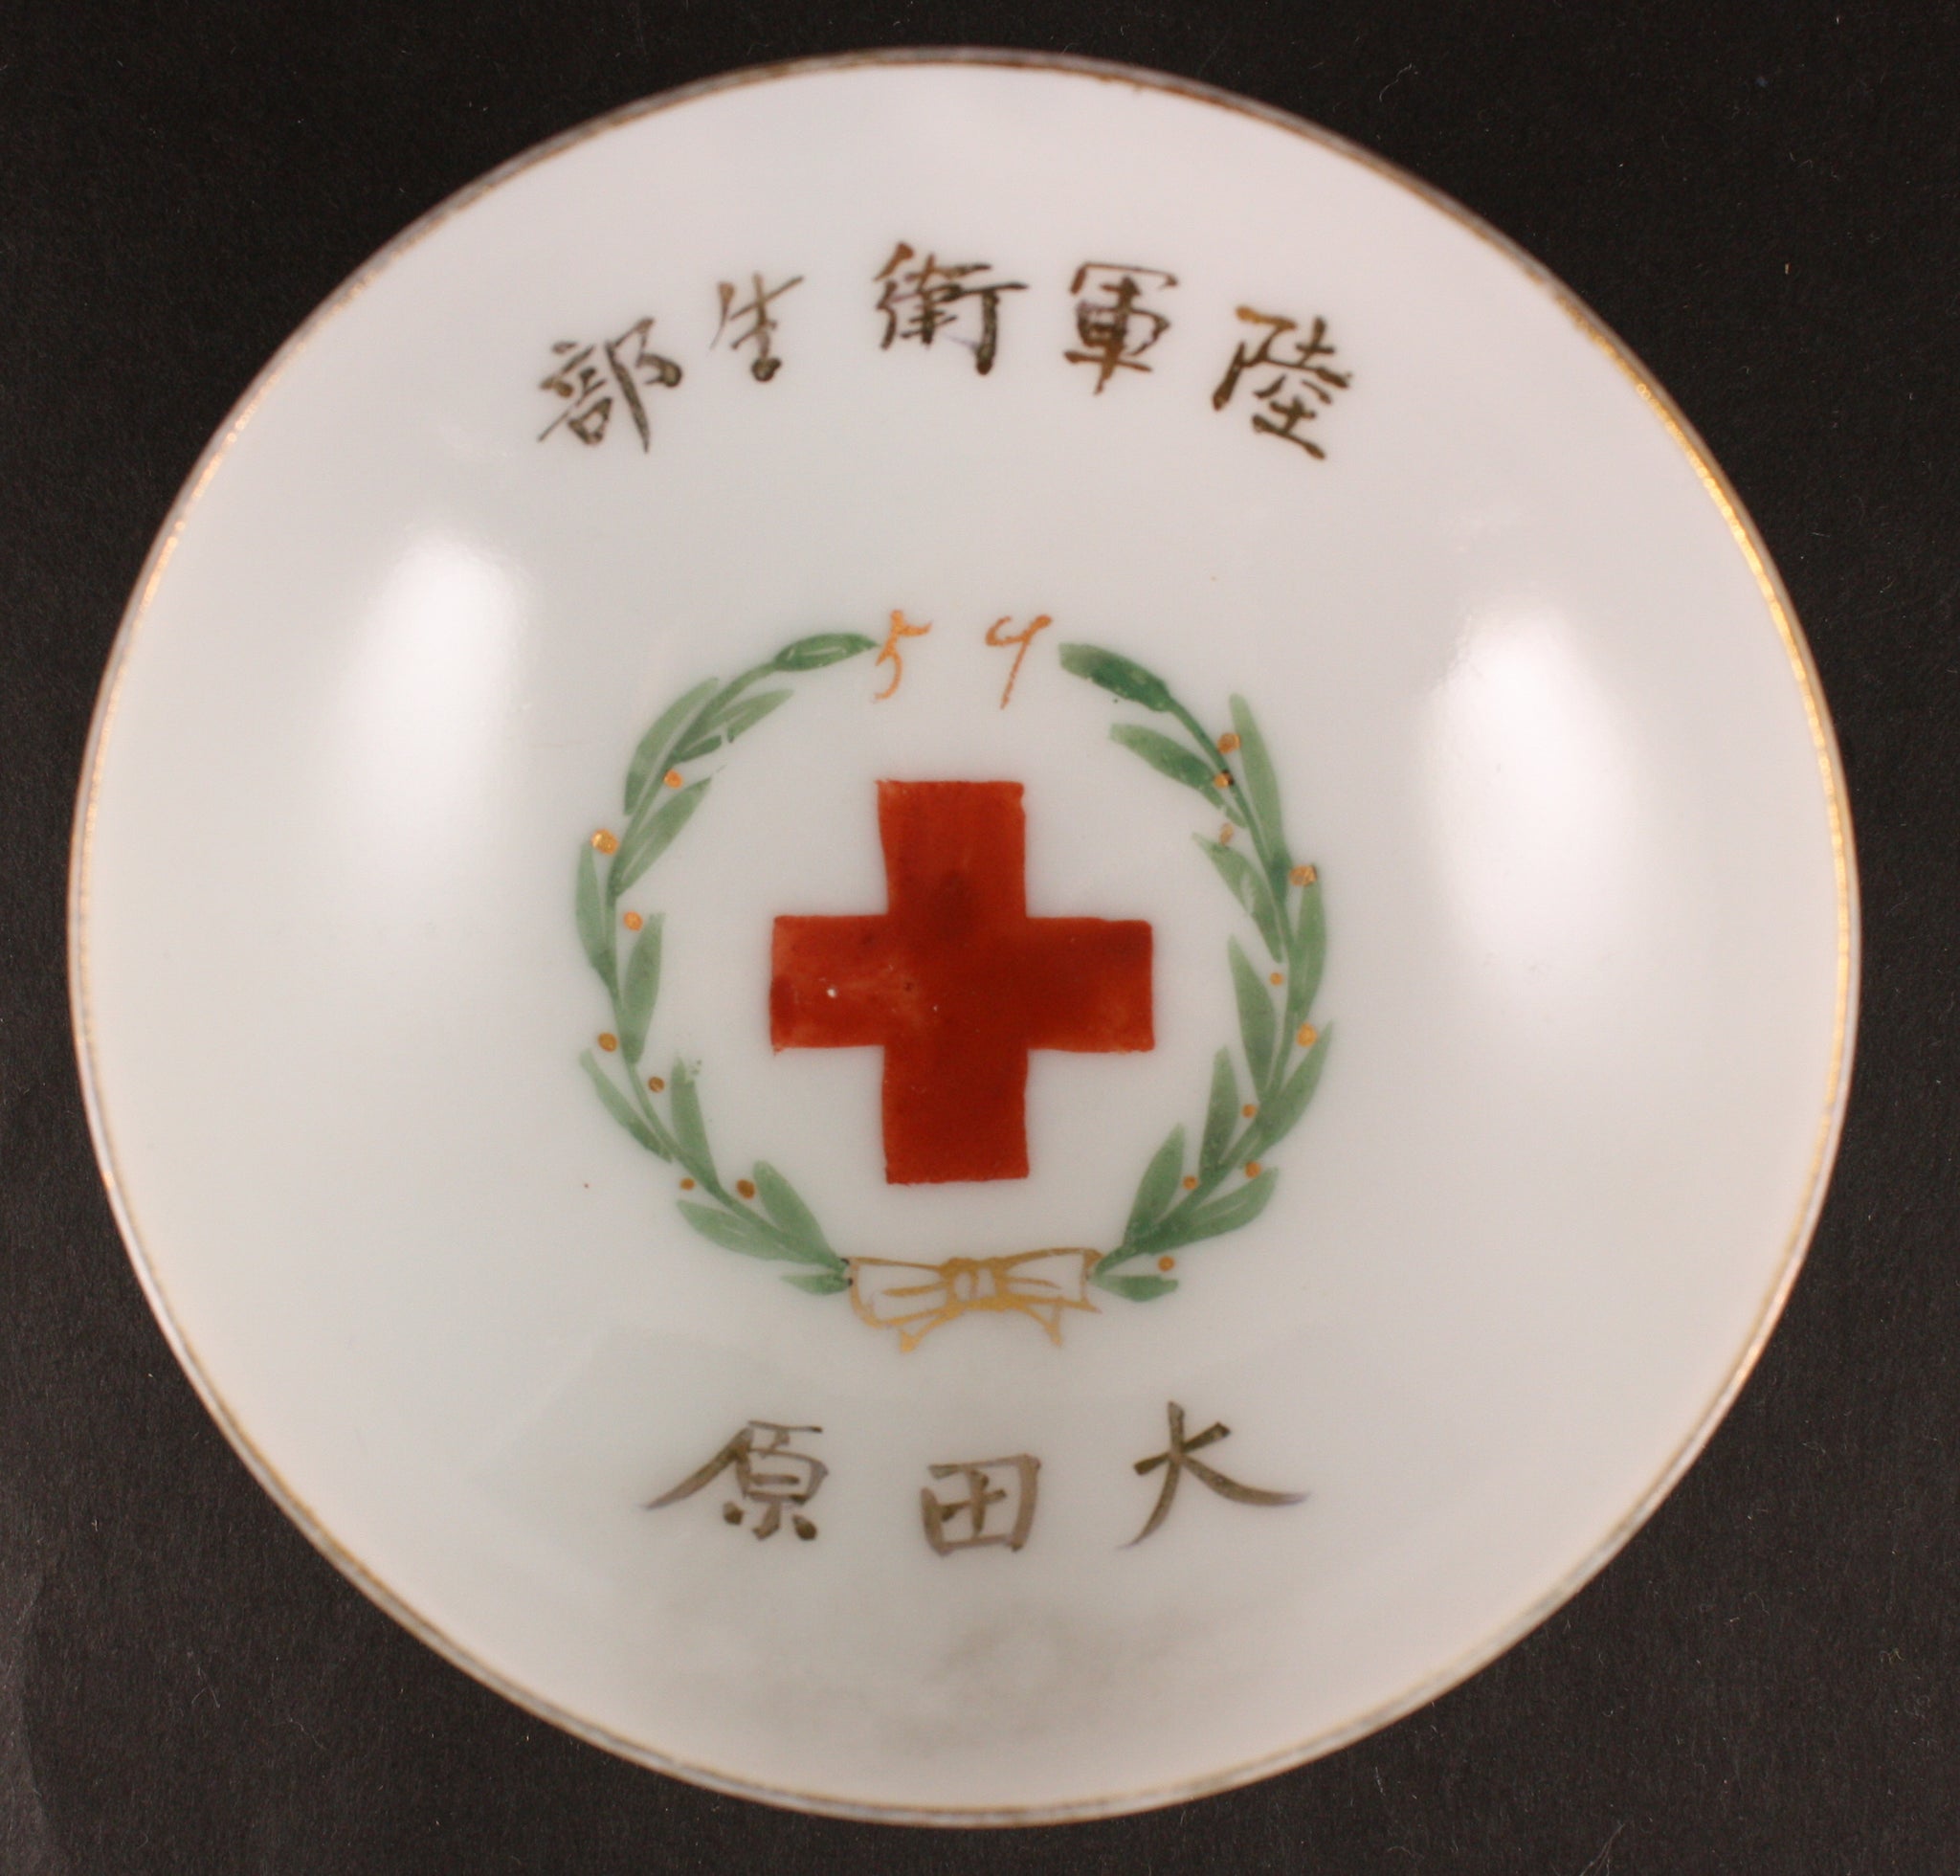 Antique Japanese Military Red Cross Medic Arabic Numerals Army Sake Cup